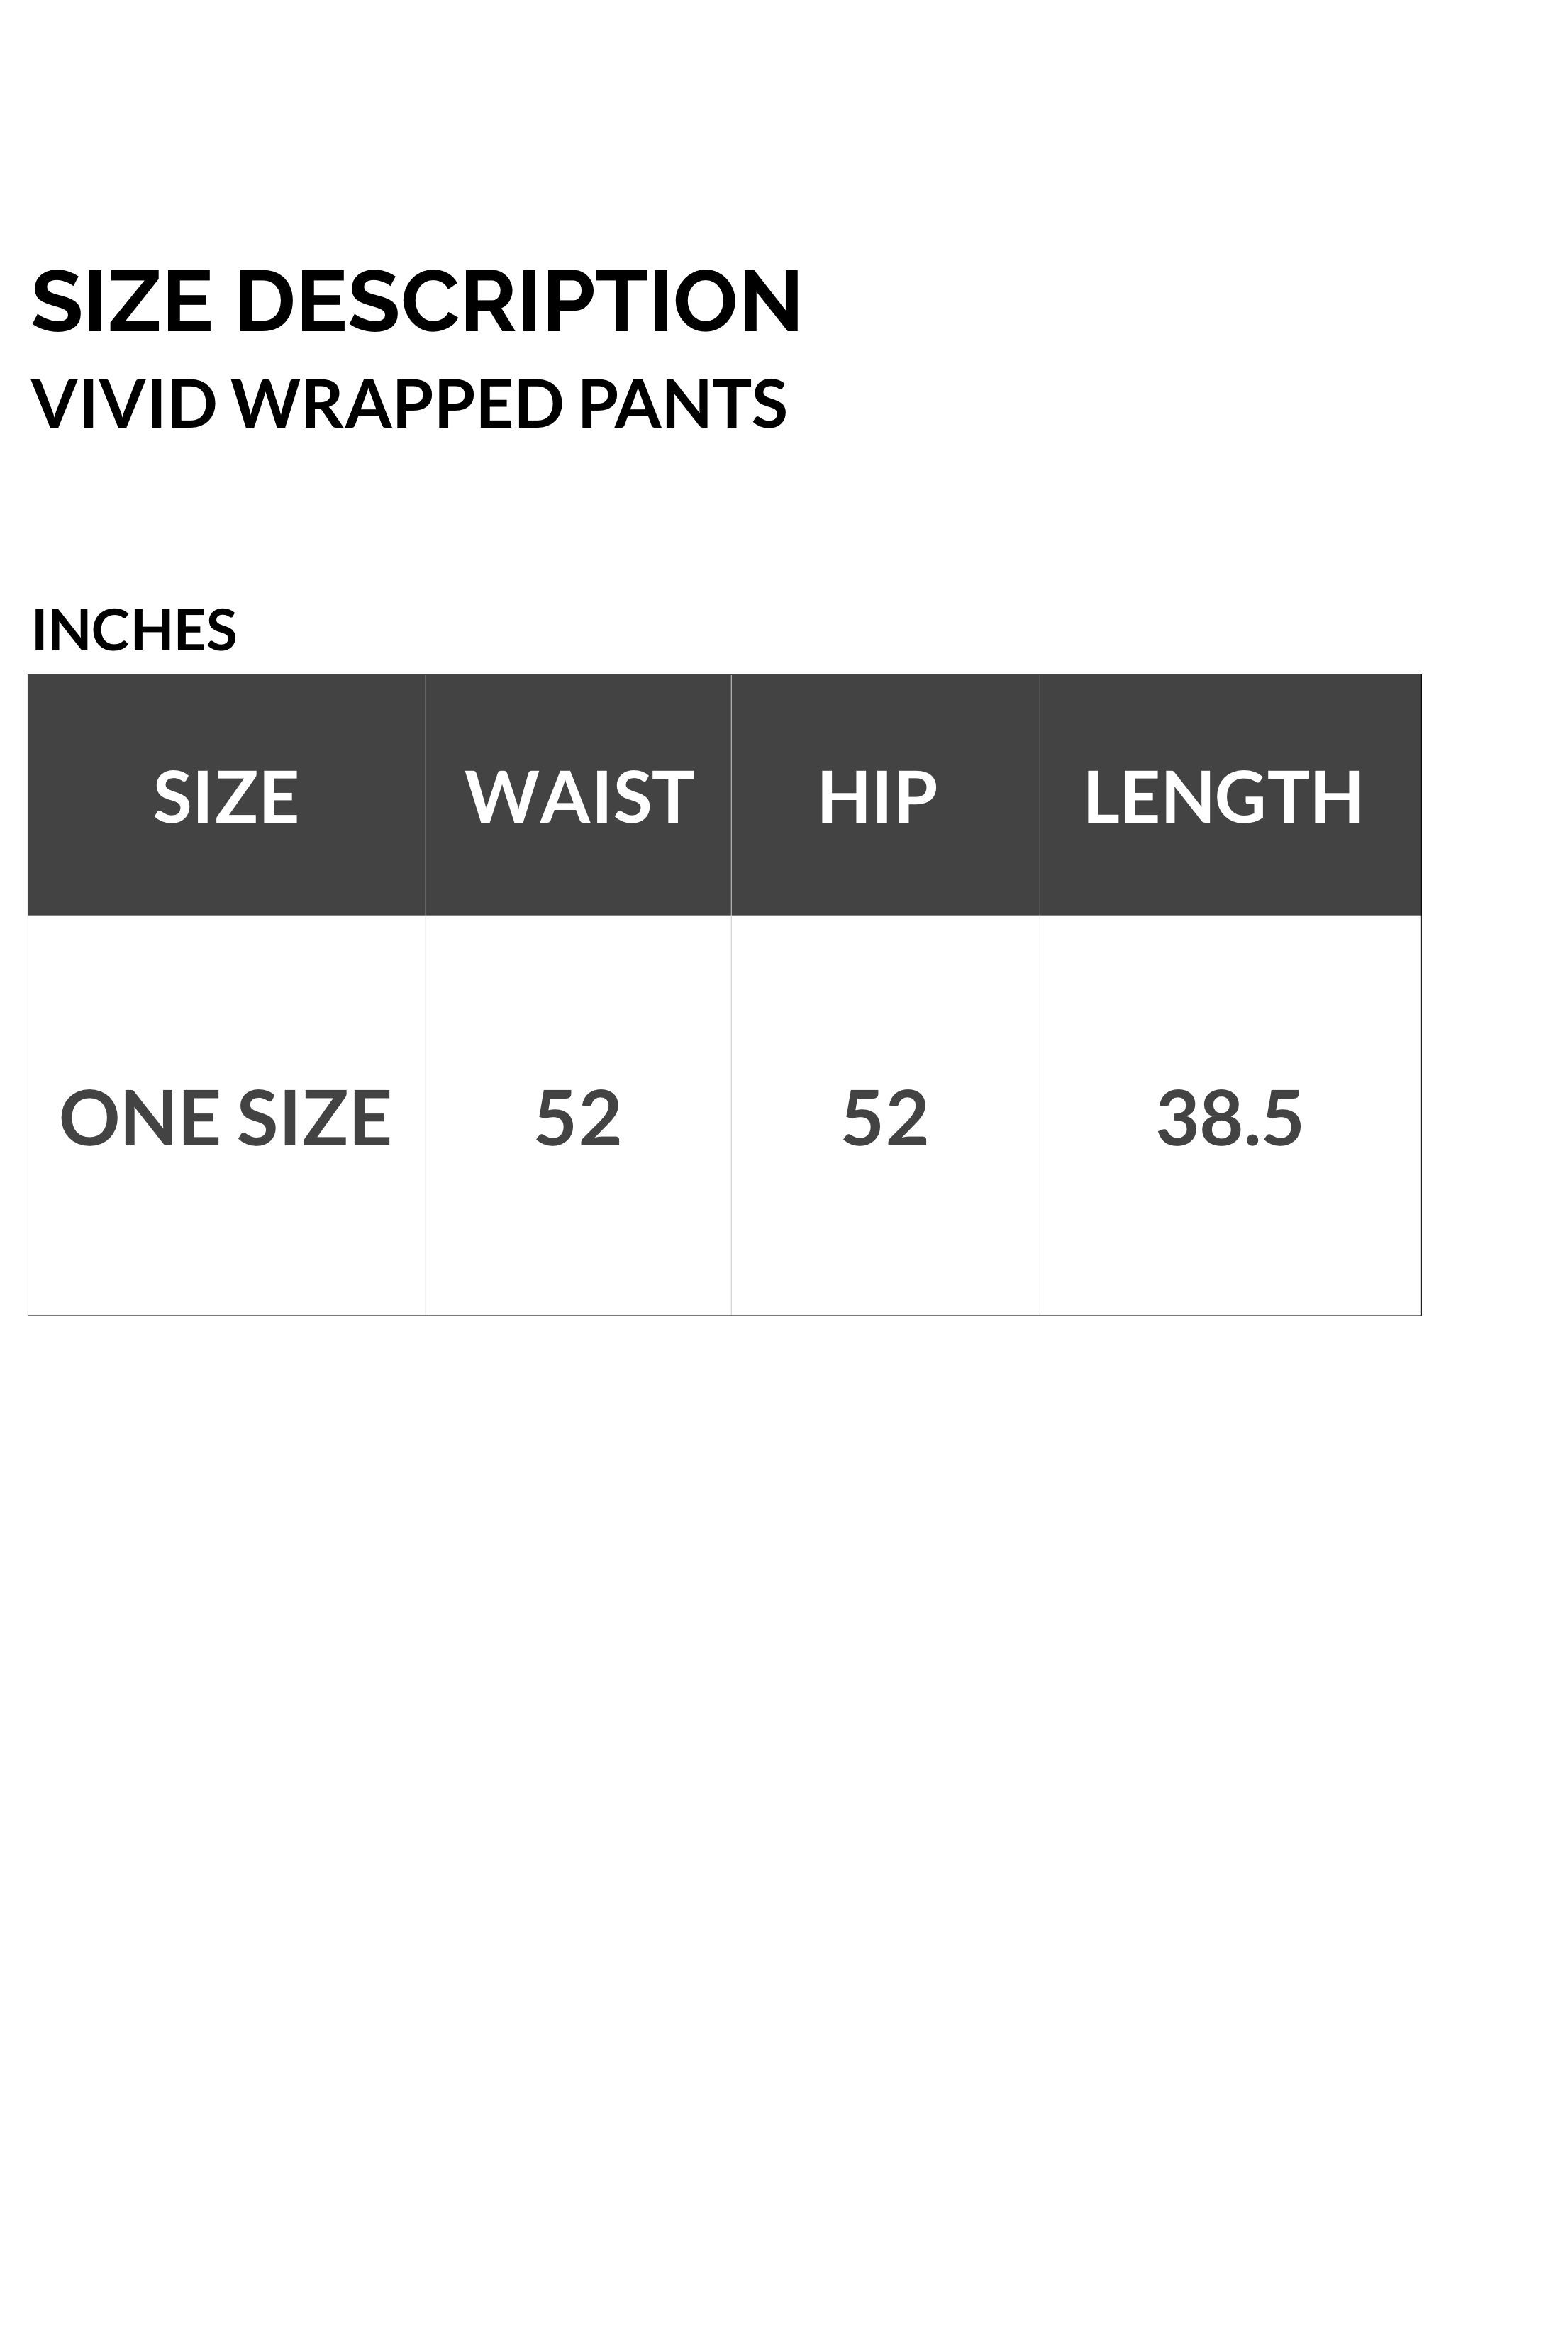 SIZES AFRICAN WRAPPED PANTS